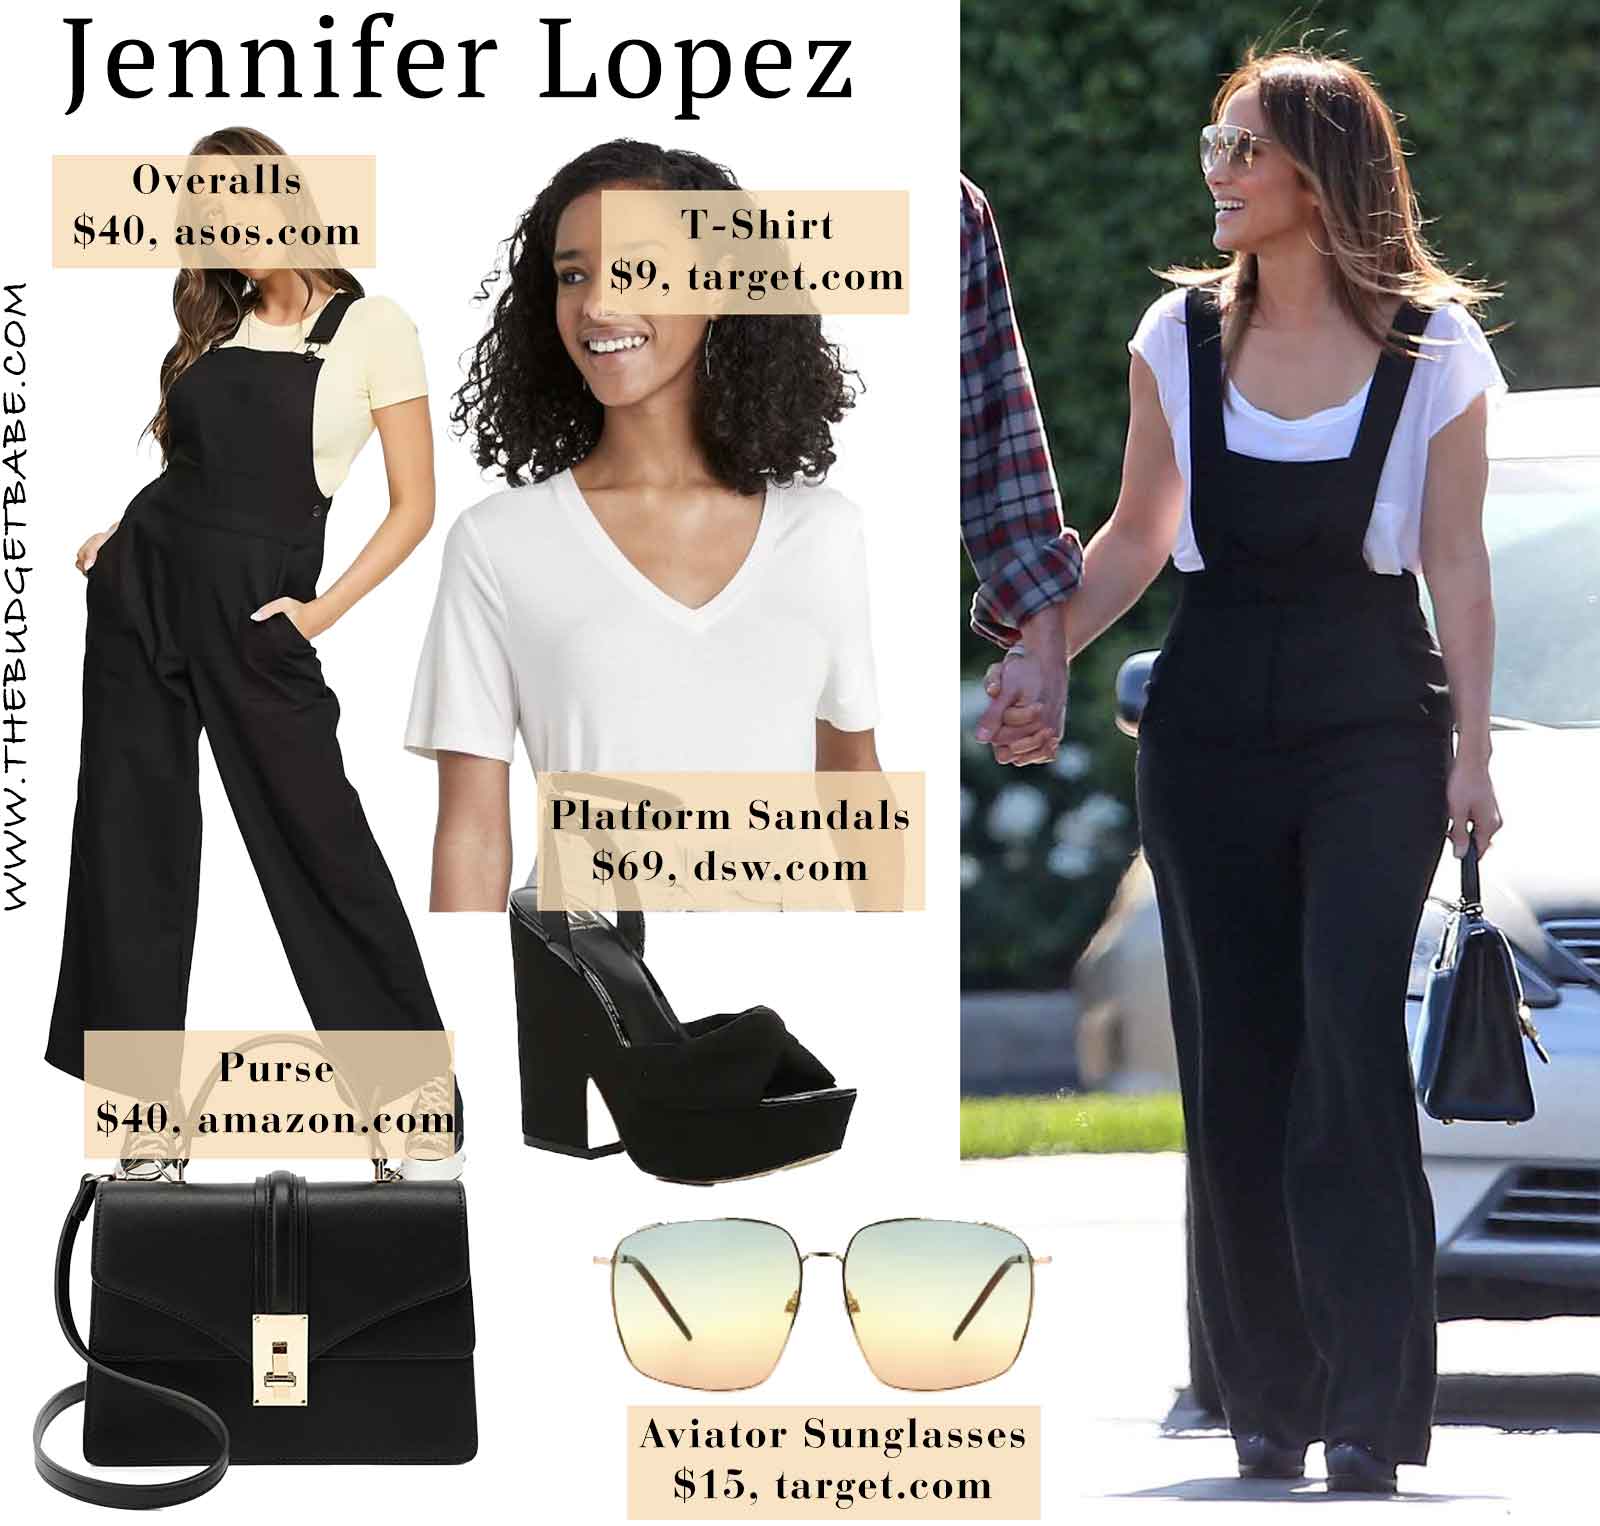 J.Lo is stylish in black overalls